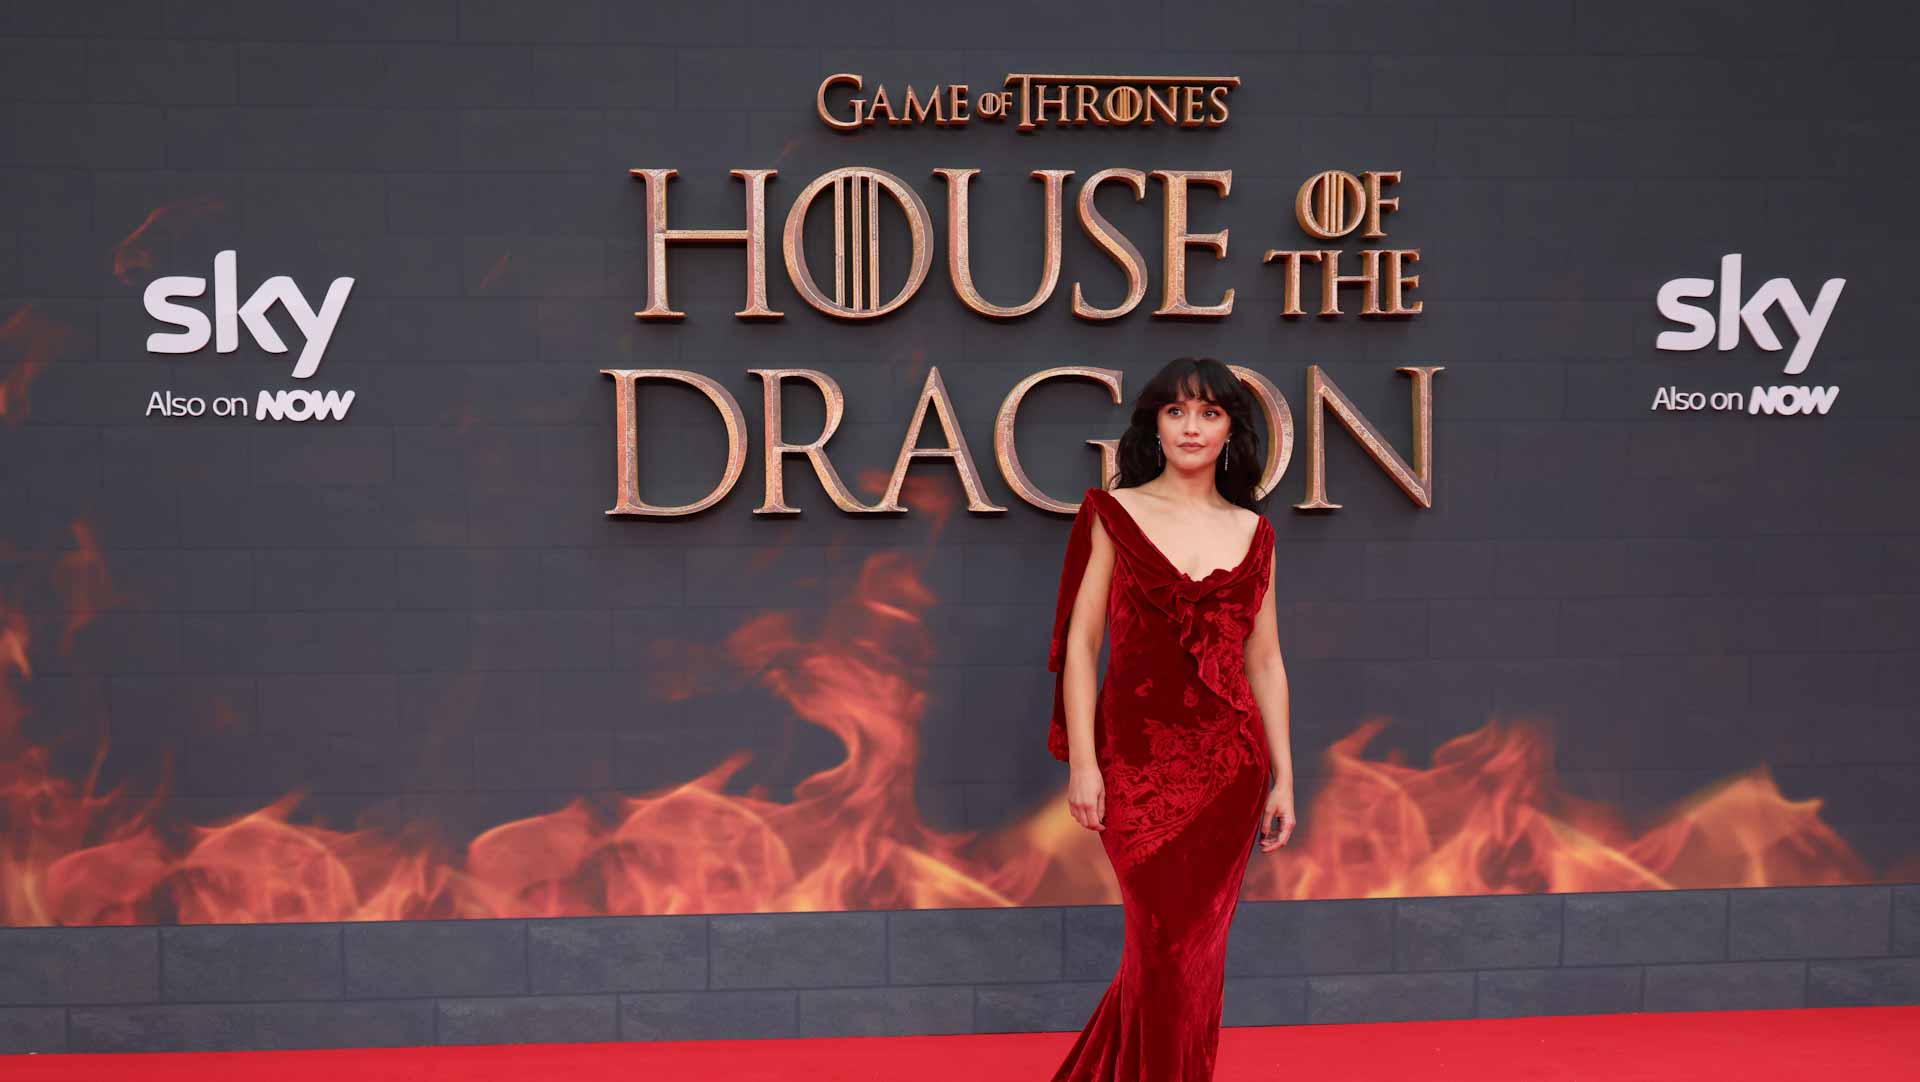 House of the Dragon' ratings boost as 'Rings of Power' nears